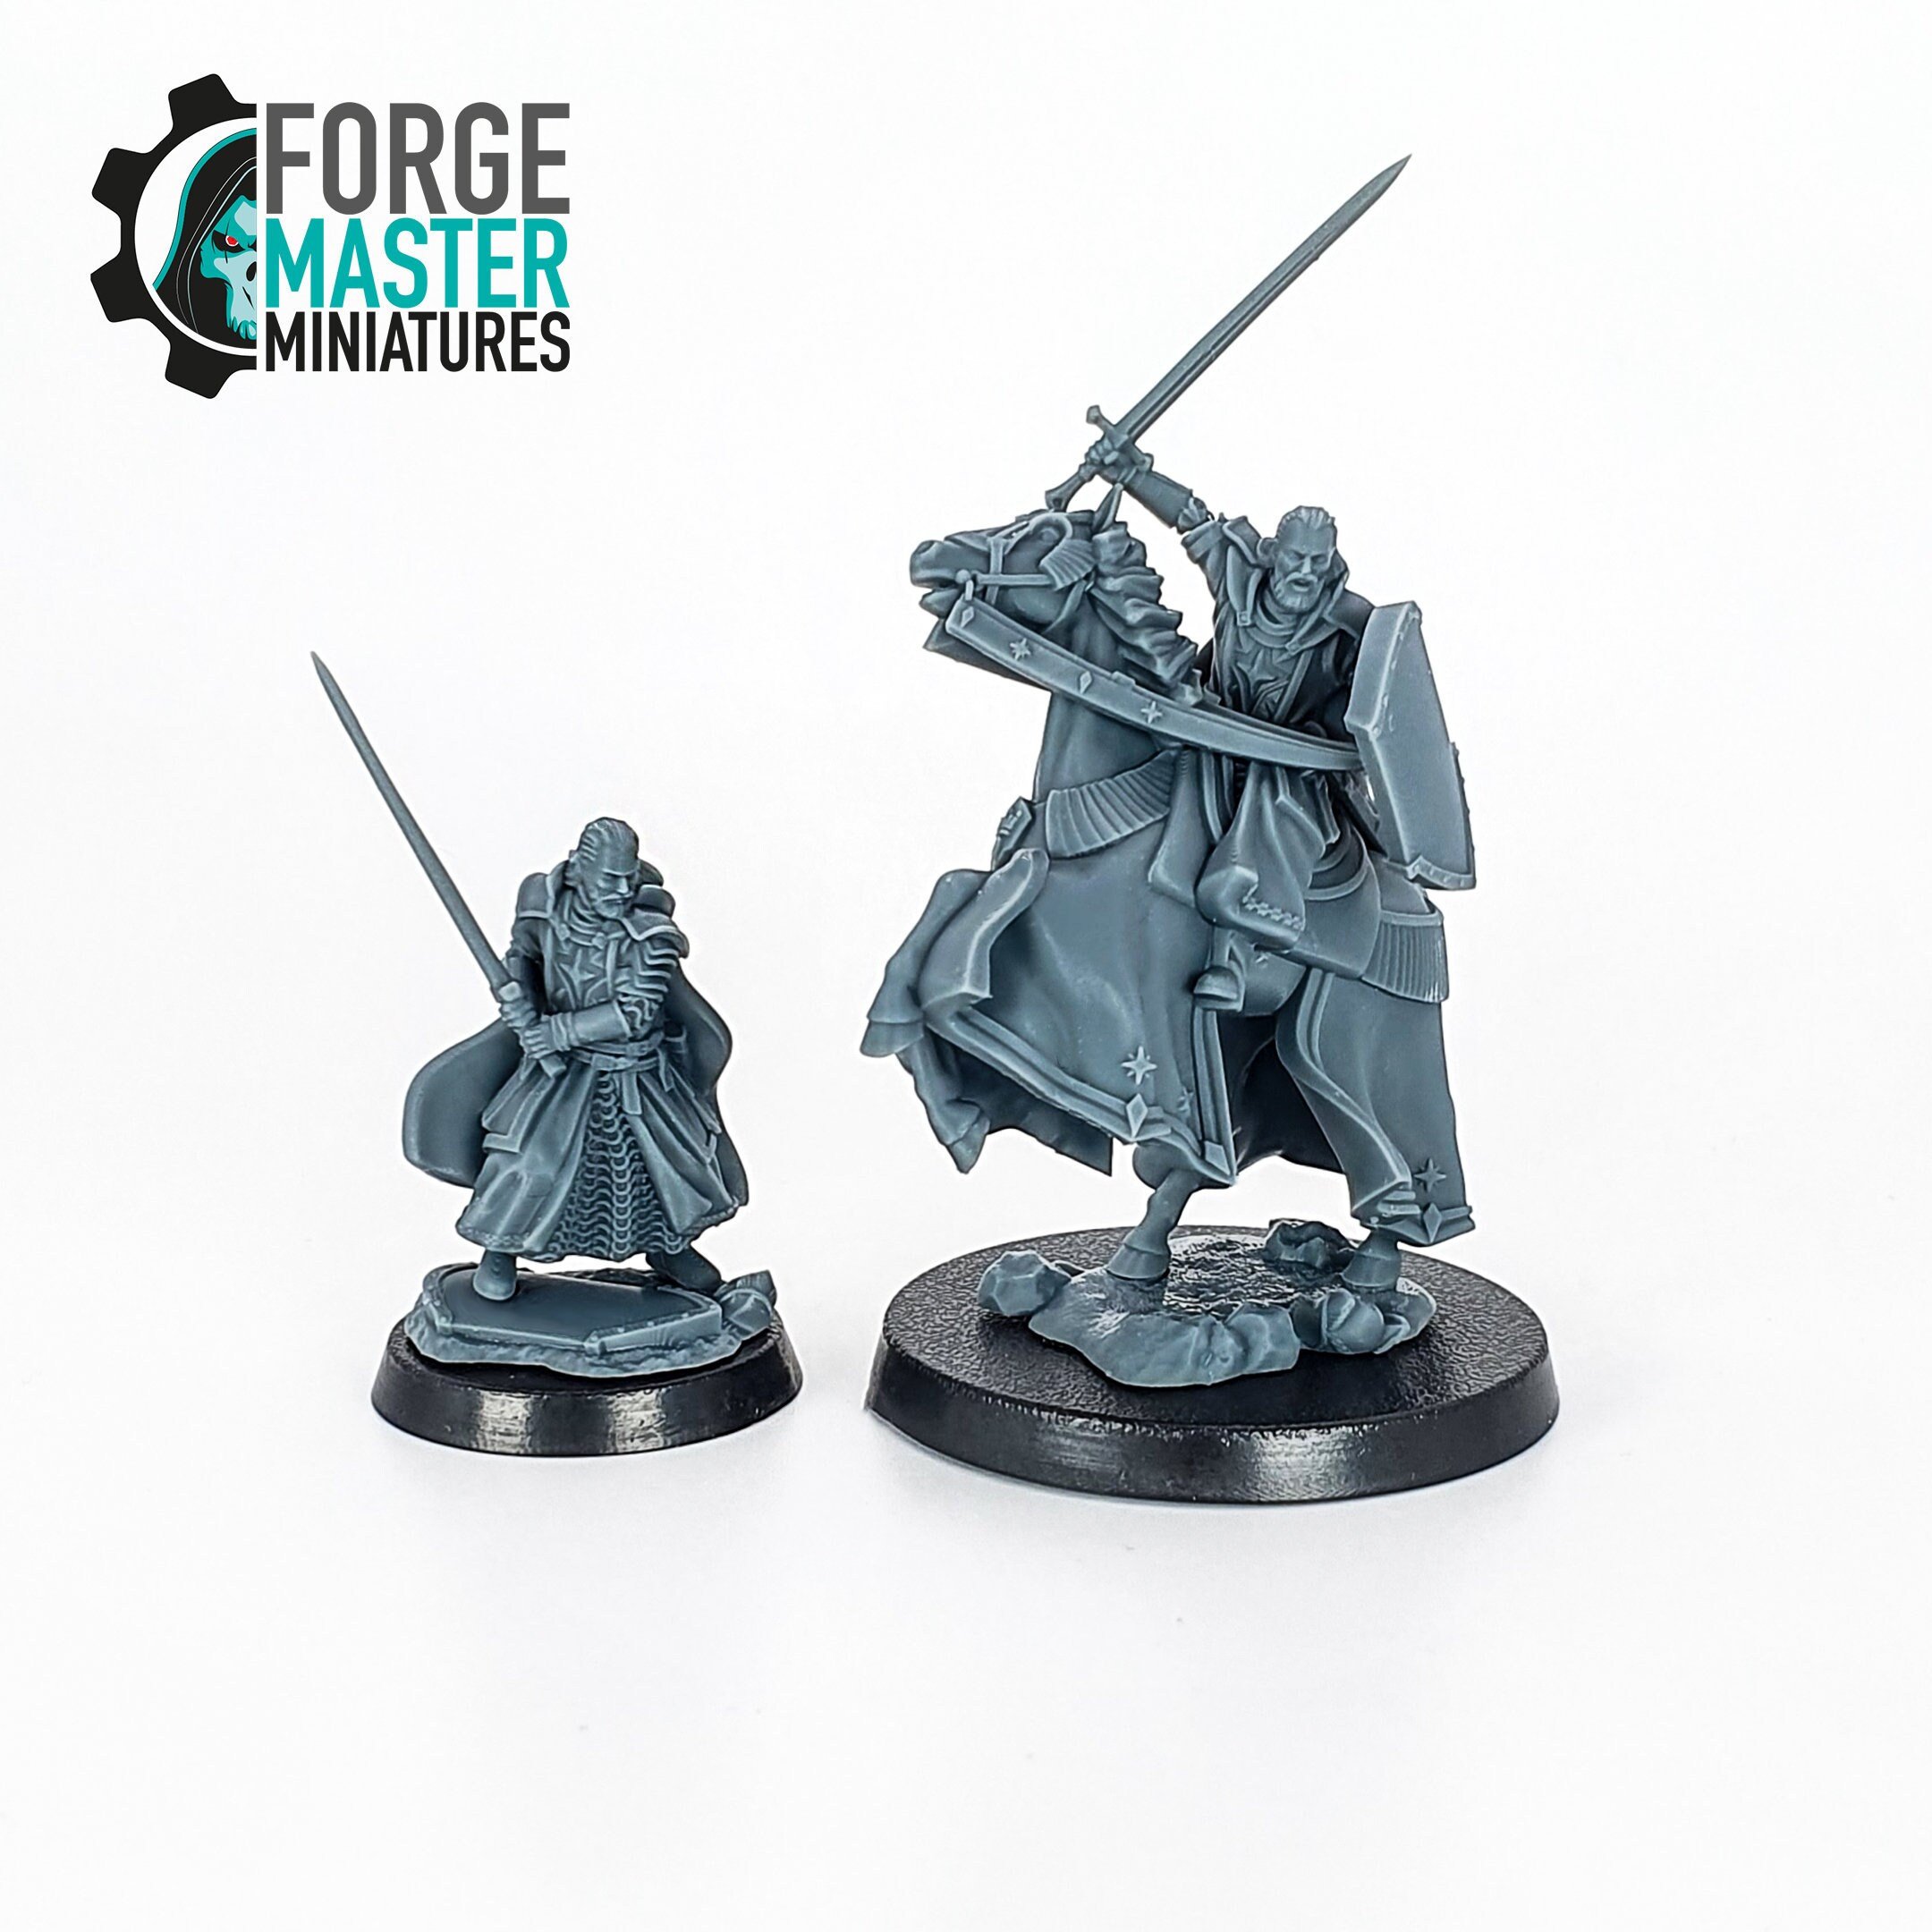 High Human King of the Last Alliance wargaming miniature by Davale Games Forgemaster Miniatures